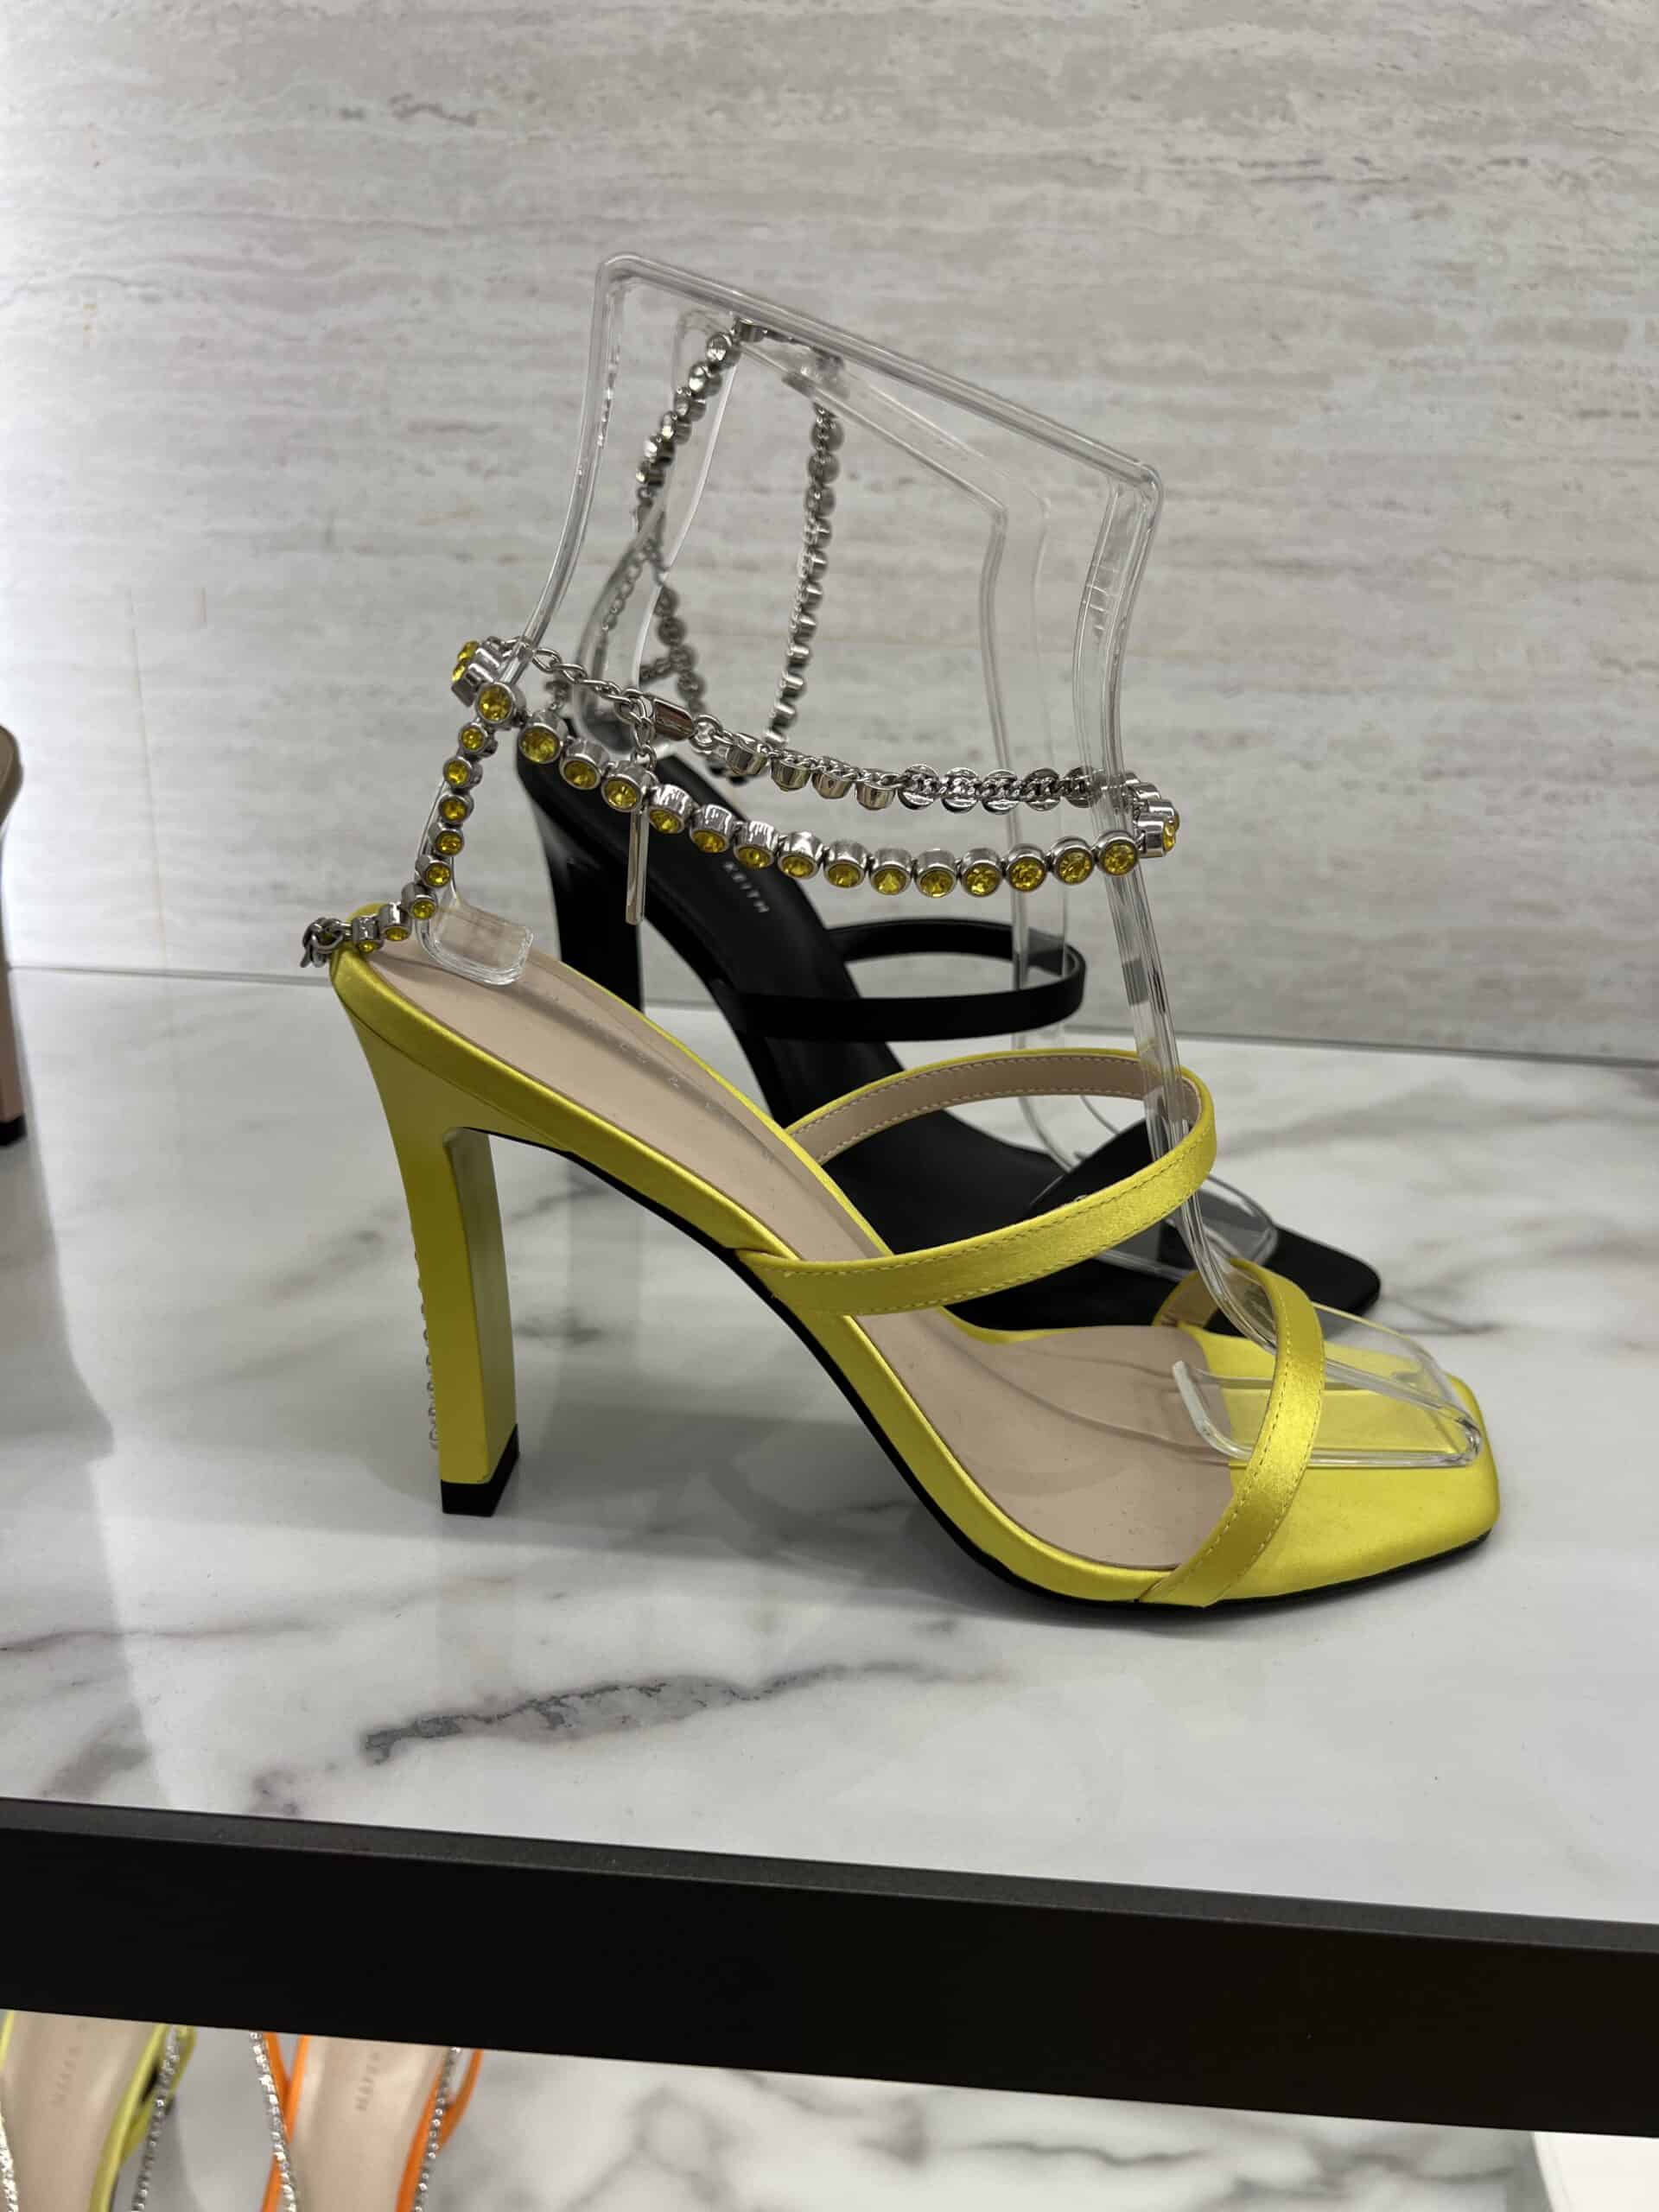 retail women ss23 sandals strappy square satin crystals beige black yellow charleskeith 2